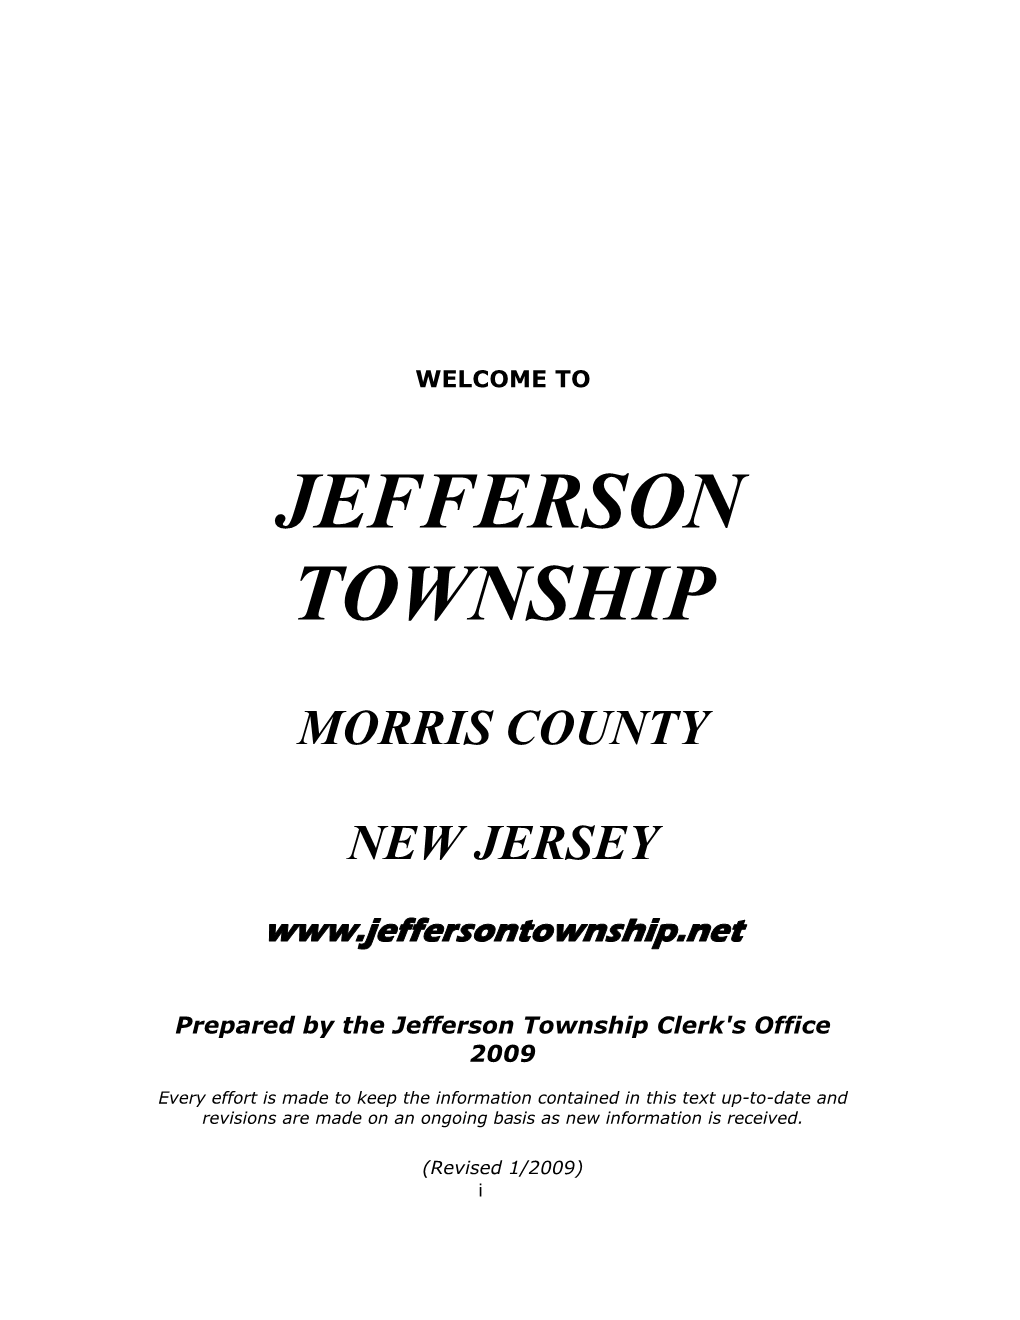 Jefferson Township Municipal Building and the Public Library